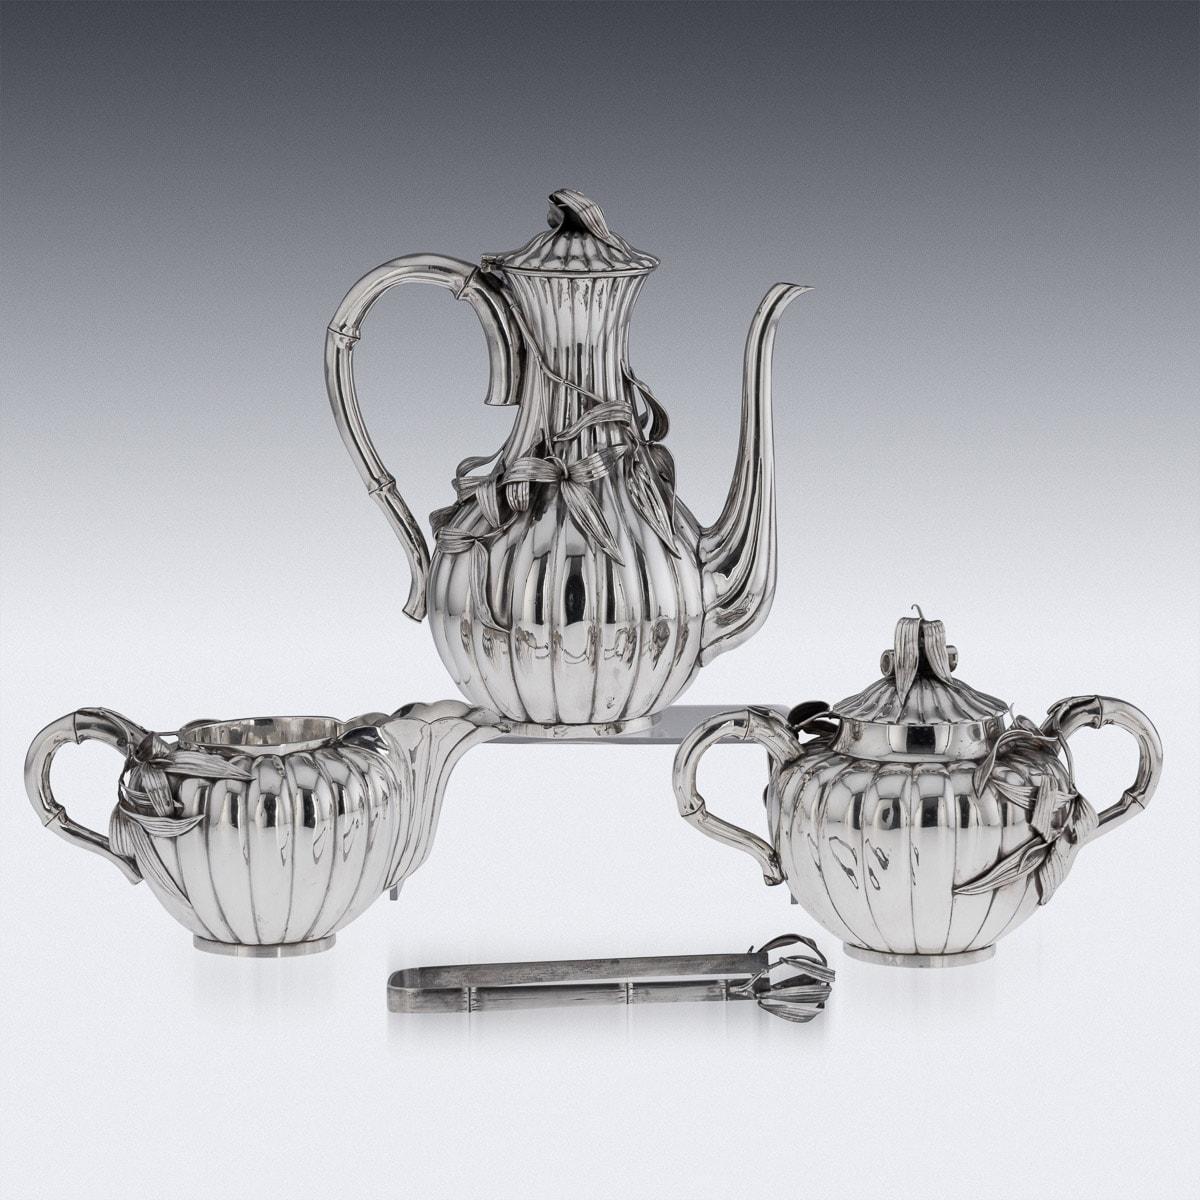 20th Century Japanese Solid Silver Coffee Set On Tray, Arthur & Bond, c.1900 For Sale 3